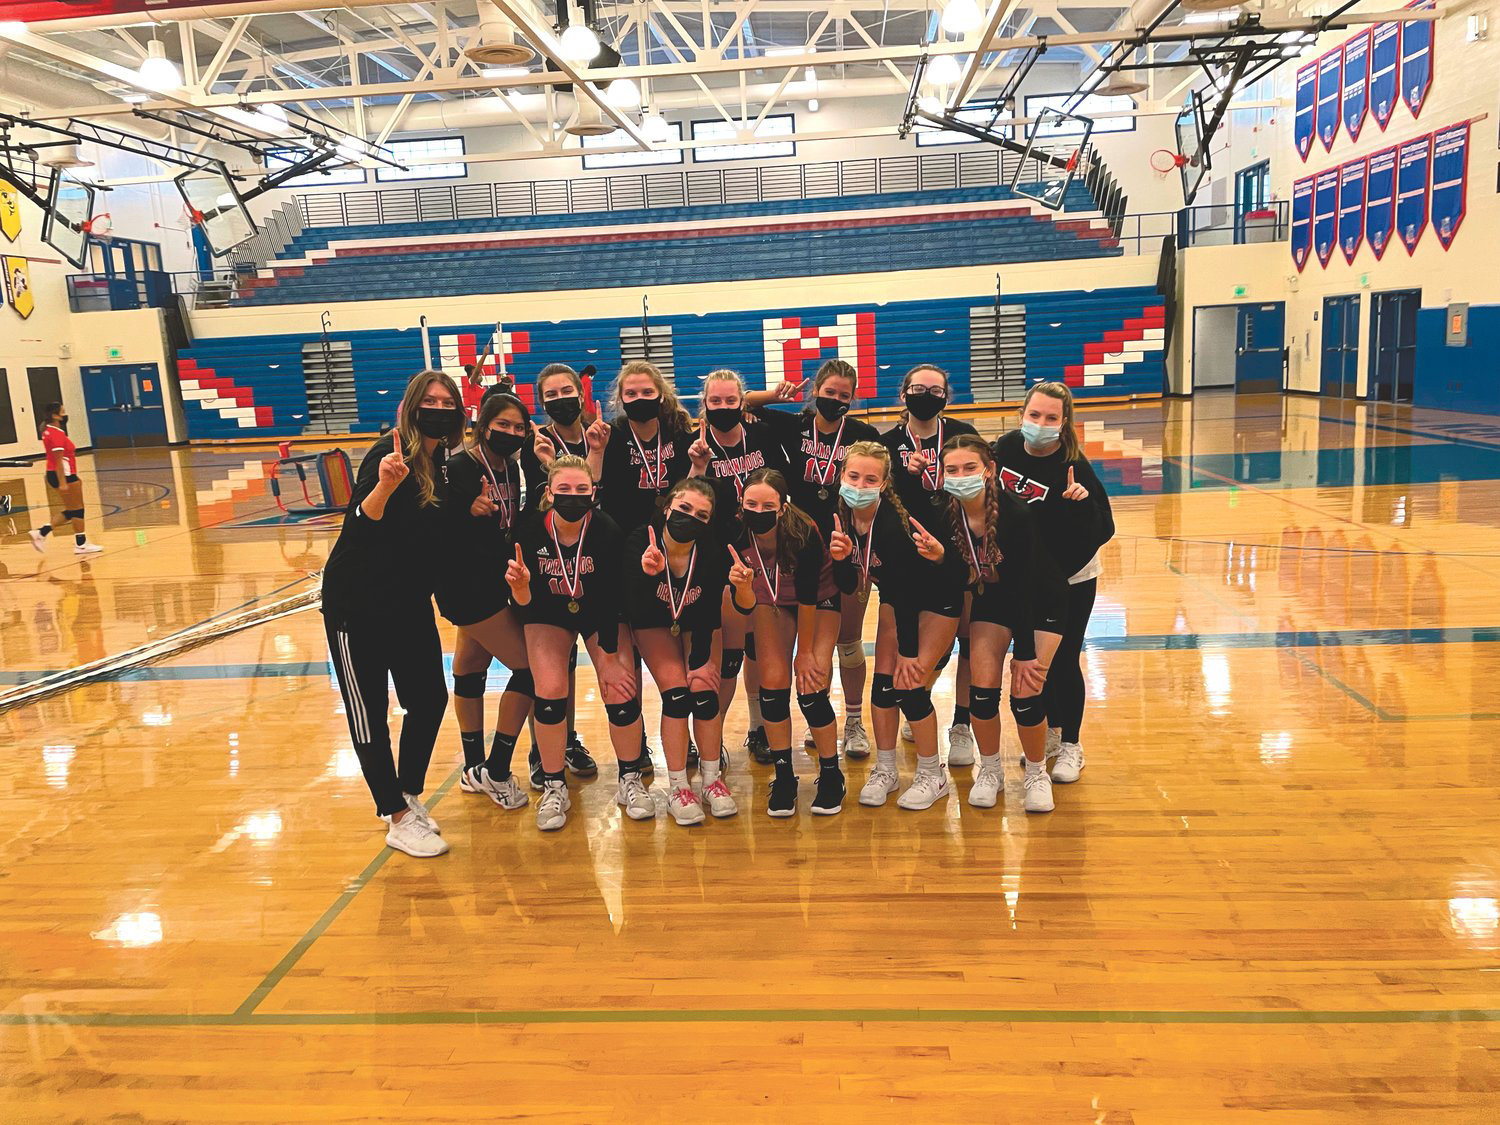 The fall 2021 Yelm High School Volleyball team celebrates after a tournament win.